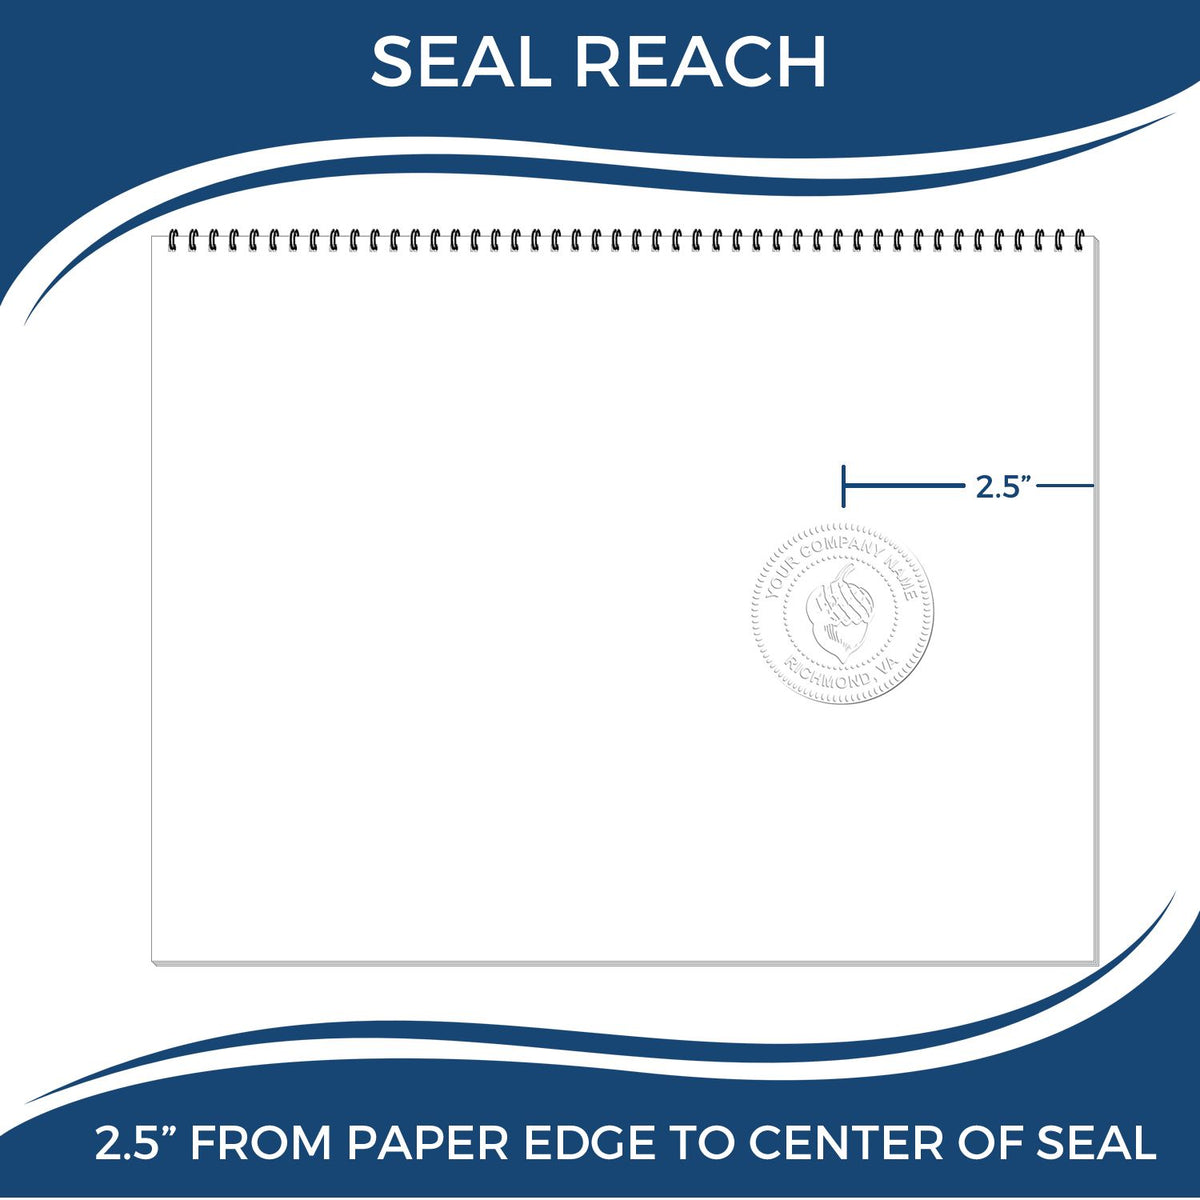 An infographic showing the seal reach which is represented by a ruler and a miniature seal image of the Heavy Duty Cast Iron Missouri Geologist Seal Embosser